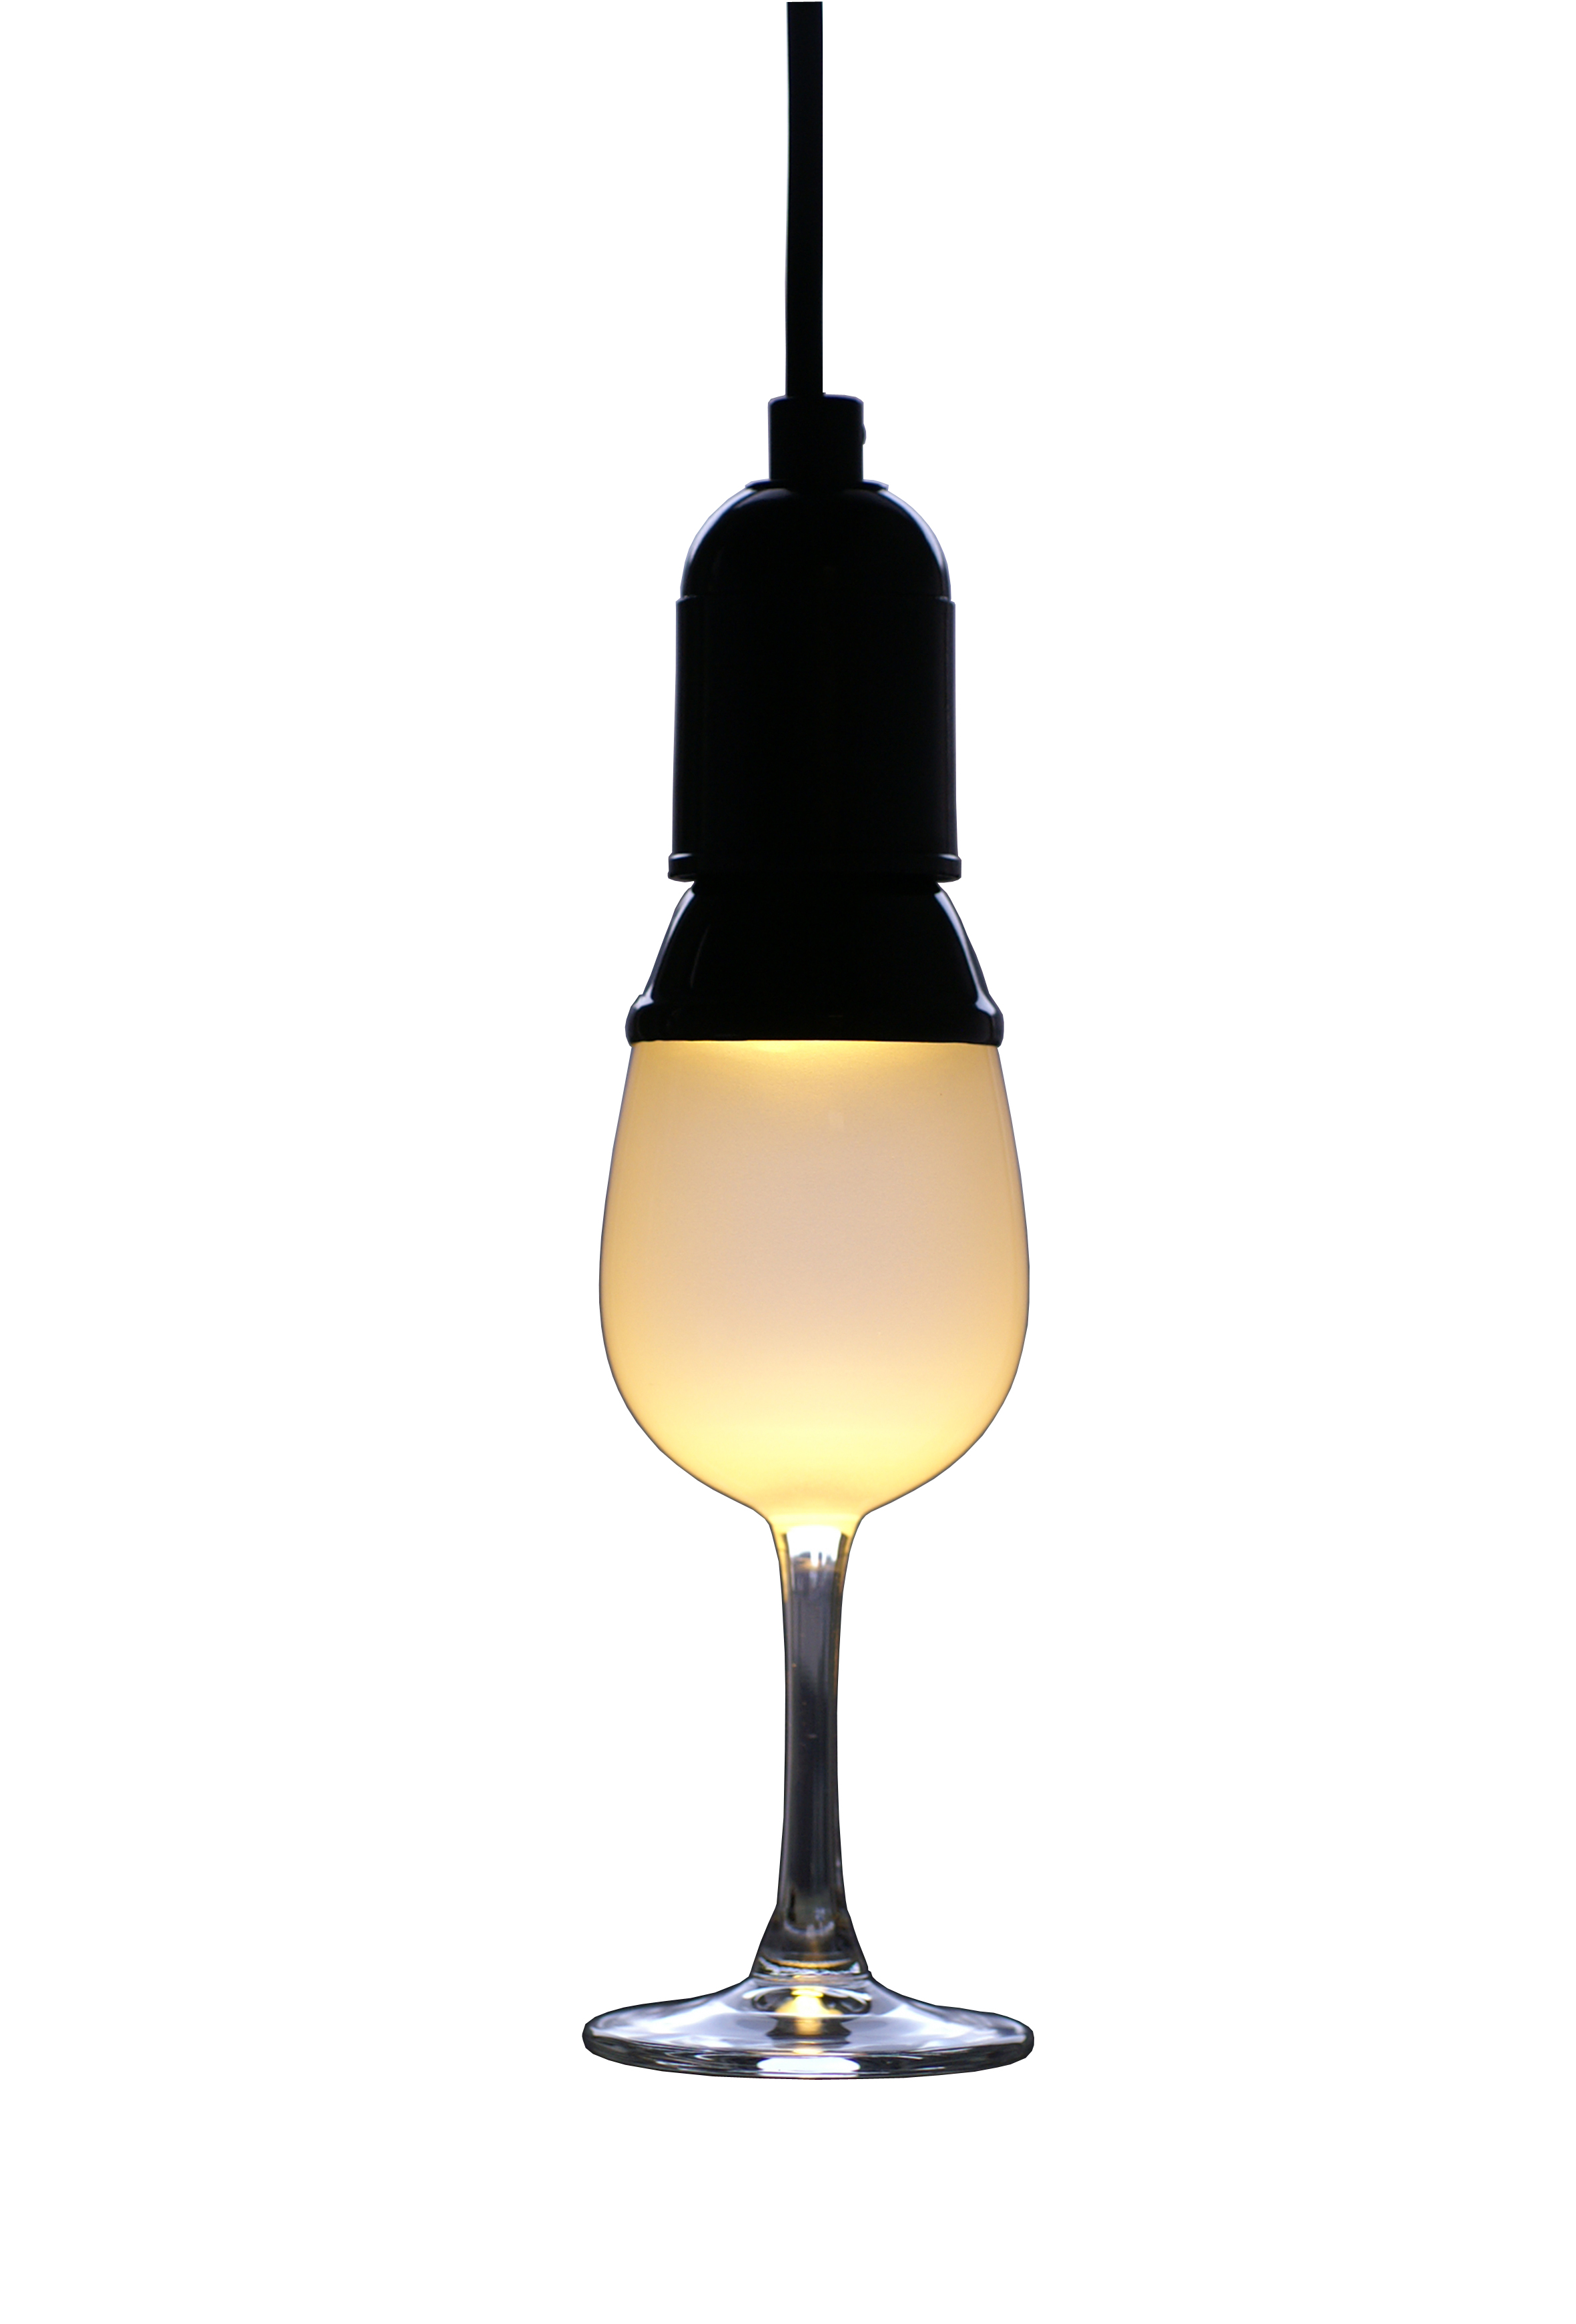 Glassbulb Lamp by OOOMS